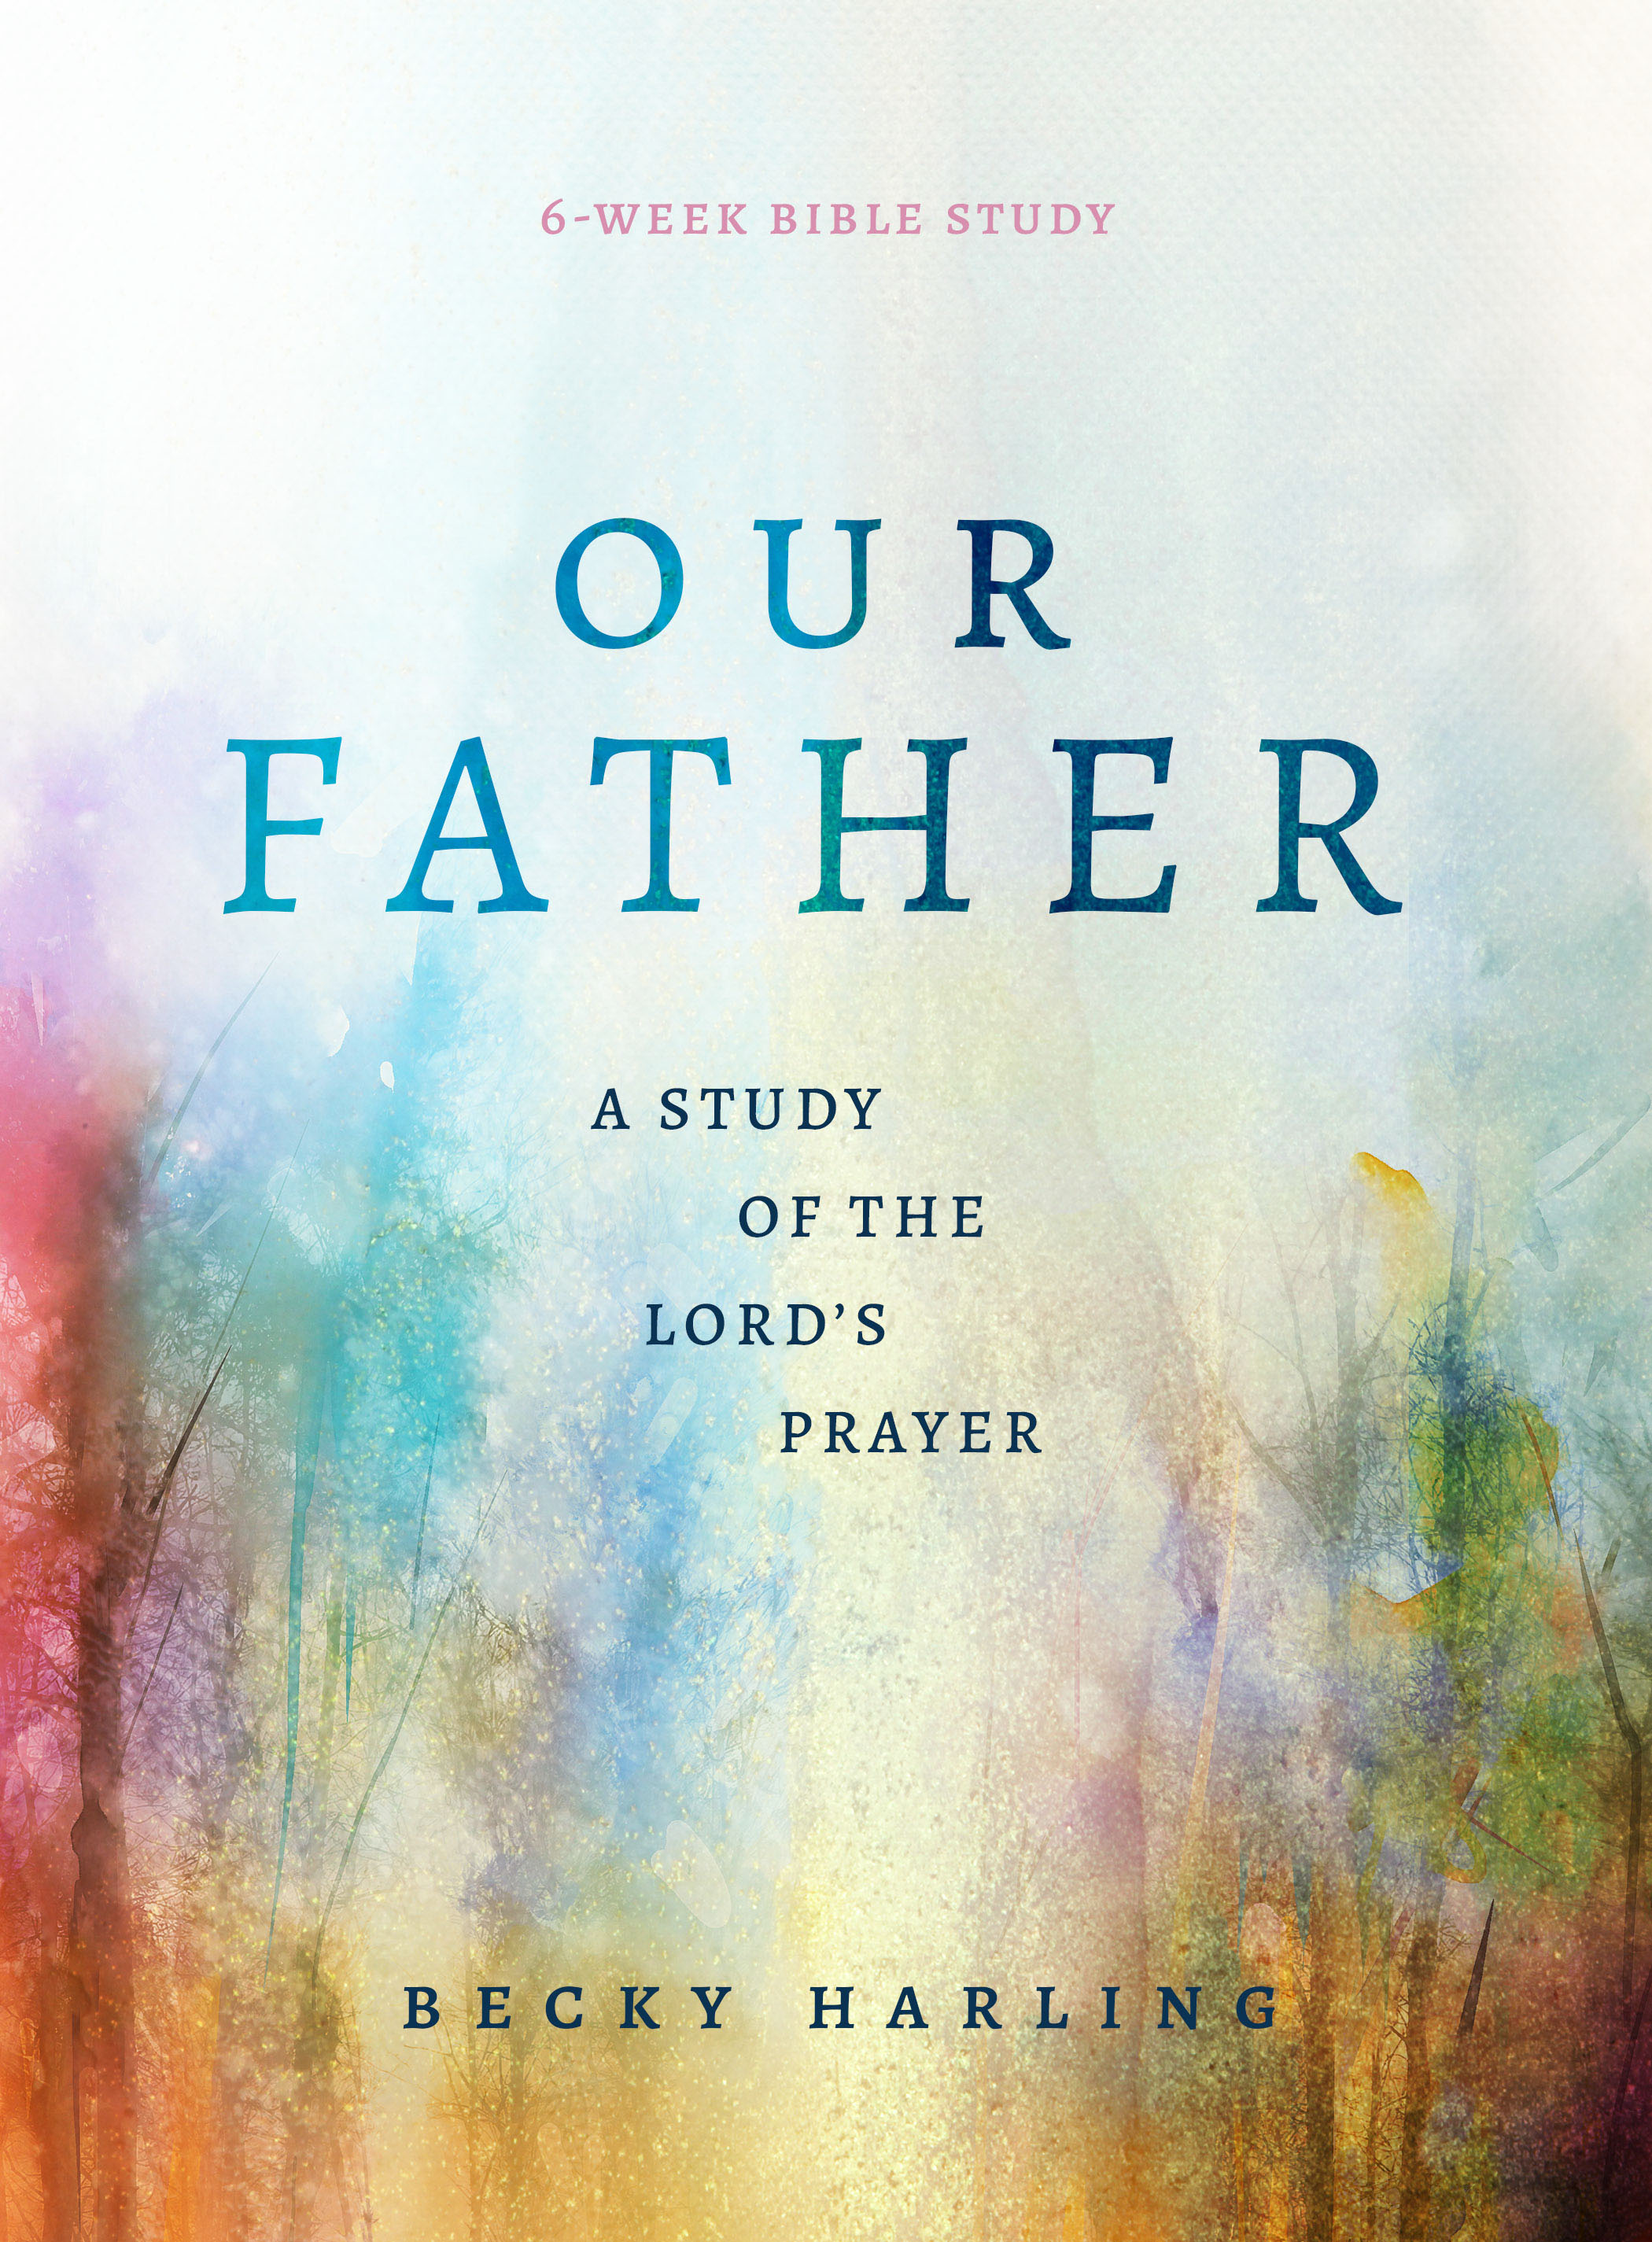 Our Father Becky Harling book bible study